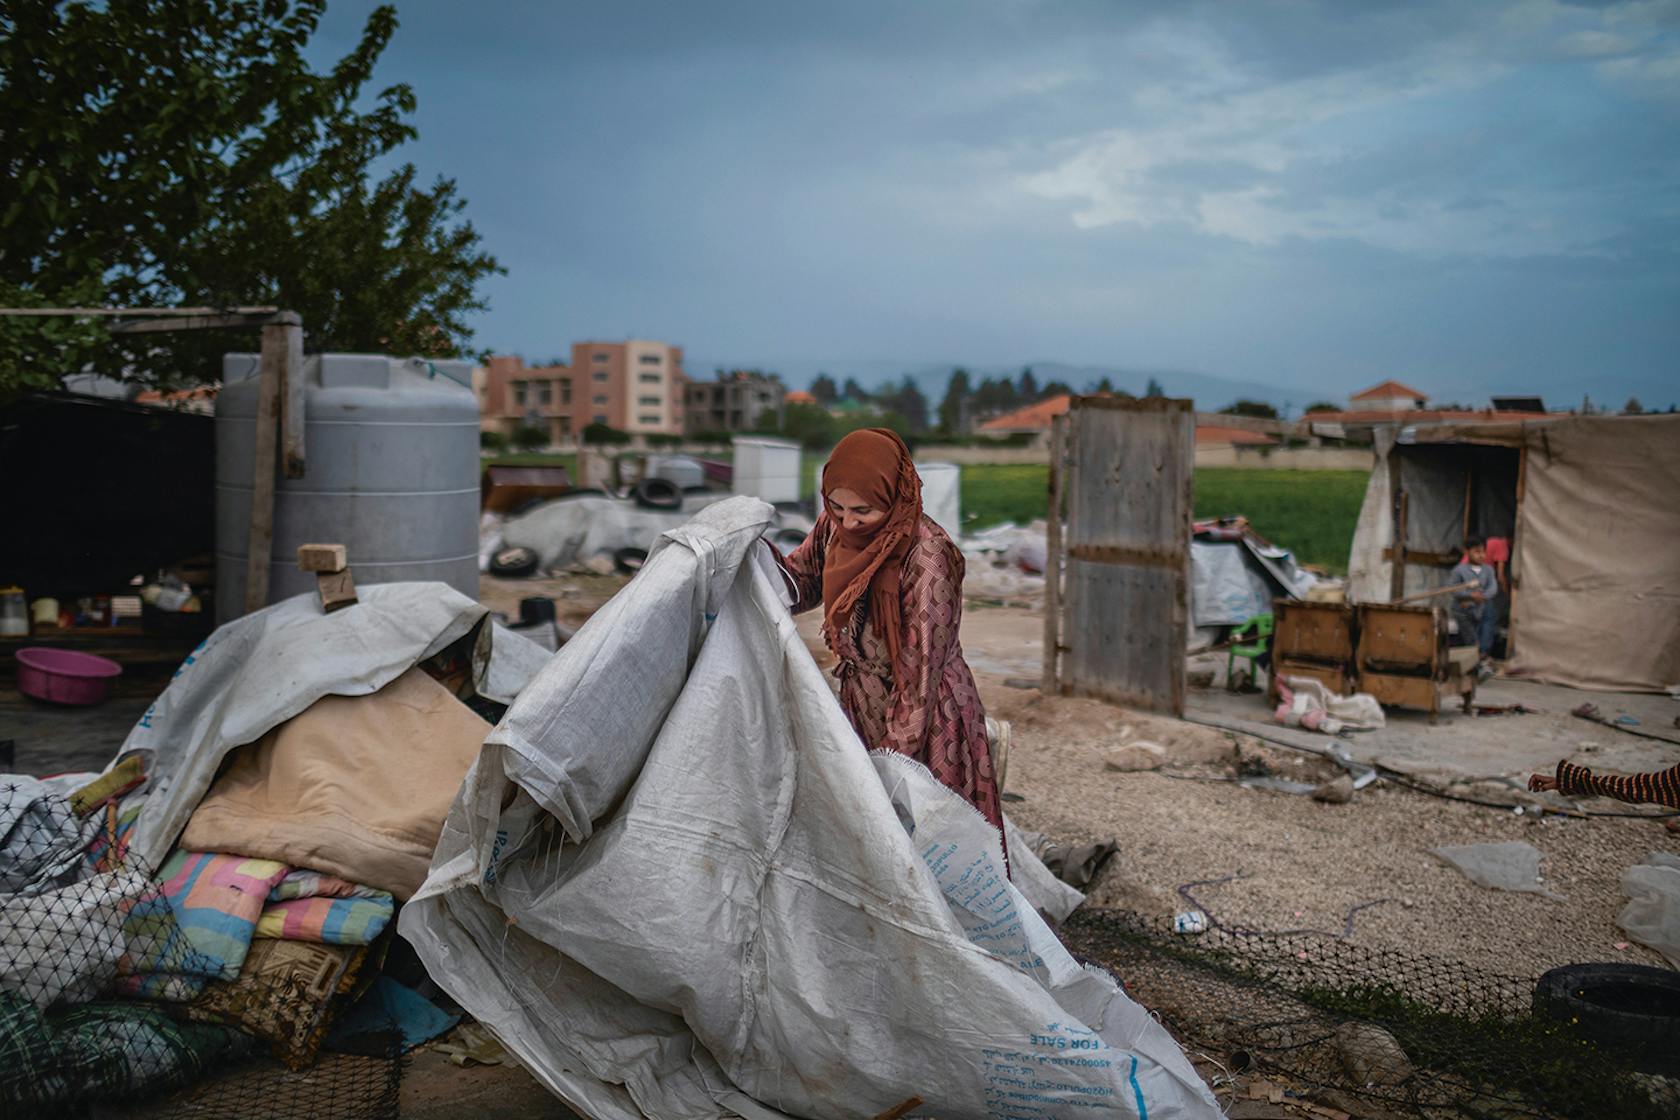 On May 5th, 2023, Yazi, 45, a Syrian refugee from Raqqa tries to rebuild her tent near Marj, Beqaa Valley, Lebanon. She is afraid after the Army intelligence destroyed her tent on May 2nd. Diego Ibarra Sánchez